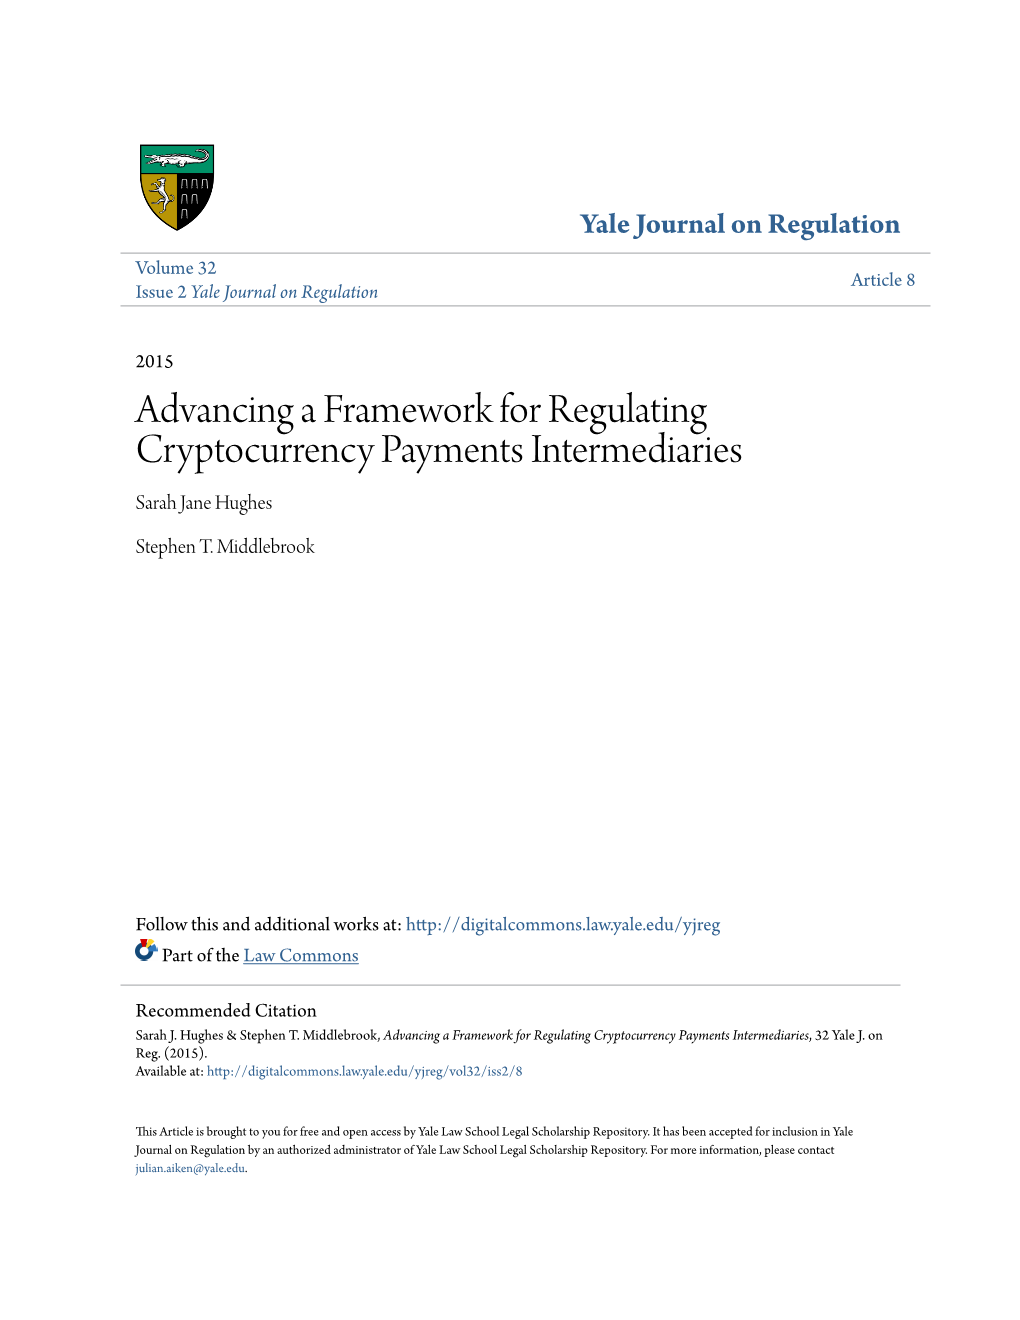 Advancing a Framework for Regulating Cryptocurrency Payments Intermediaries Sarah Jane Hughes